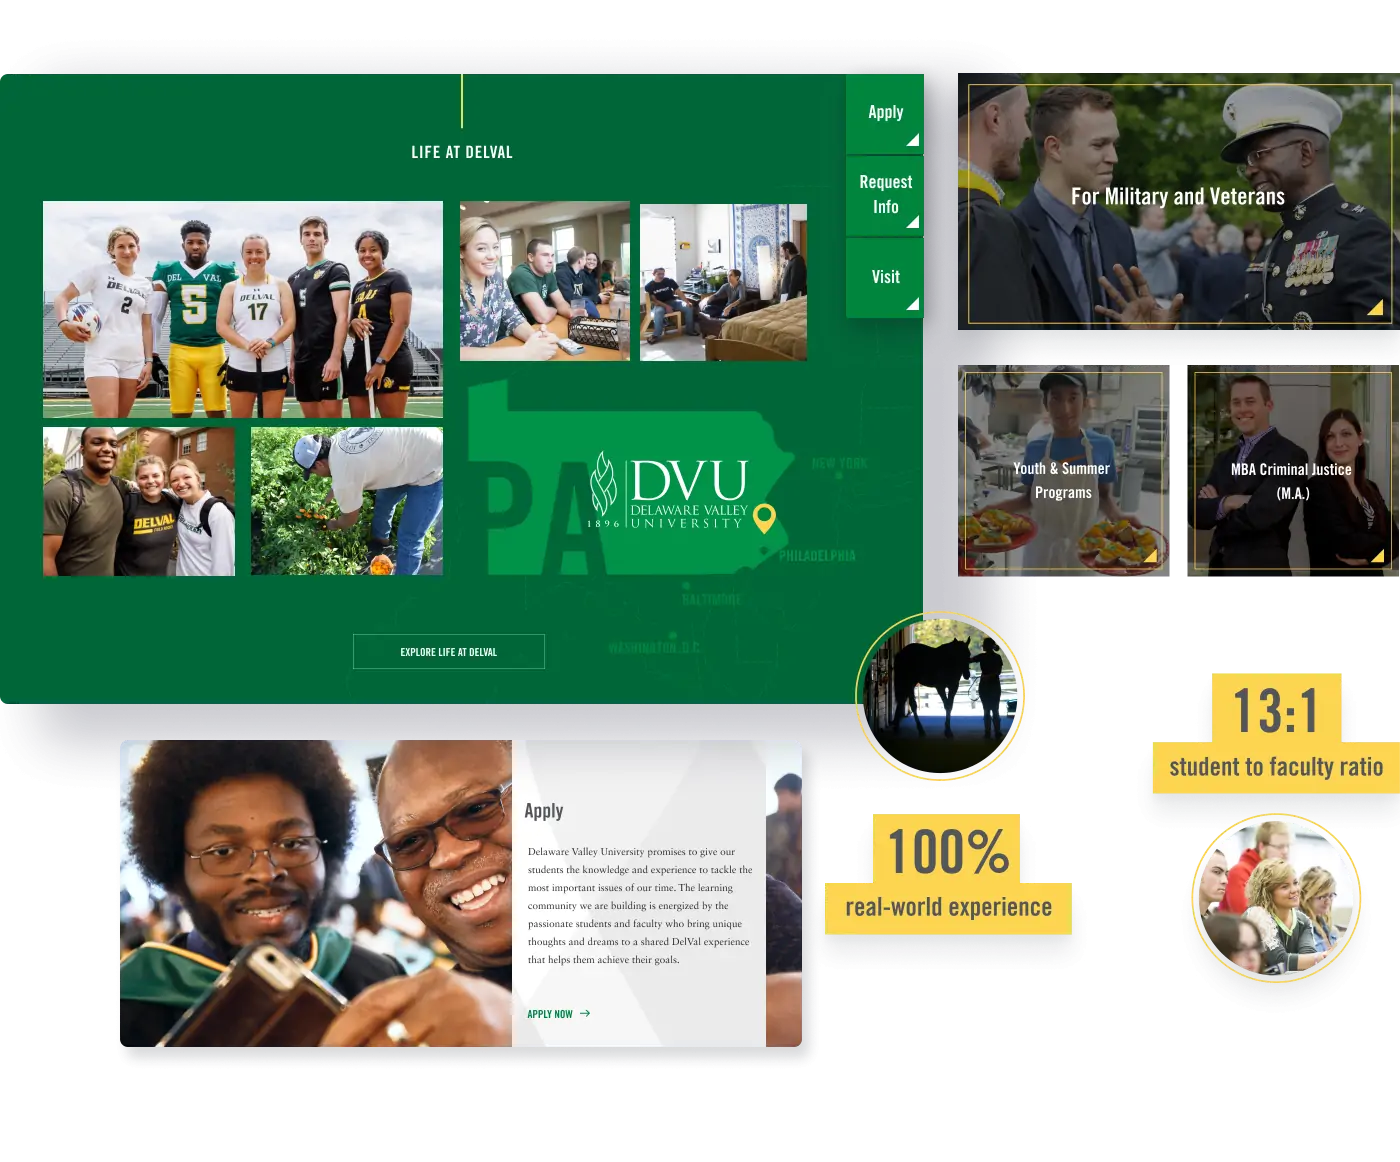 A collage showing different design elements of Delaware Valley University's website featuring student life and statistics such as a 13:1 student to faculty ratio